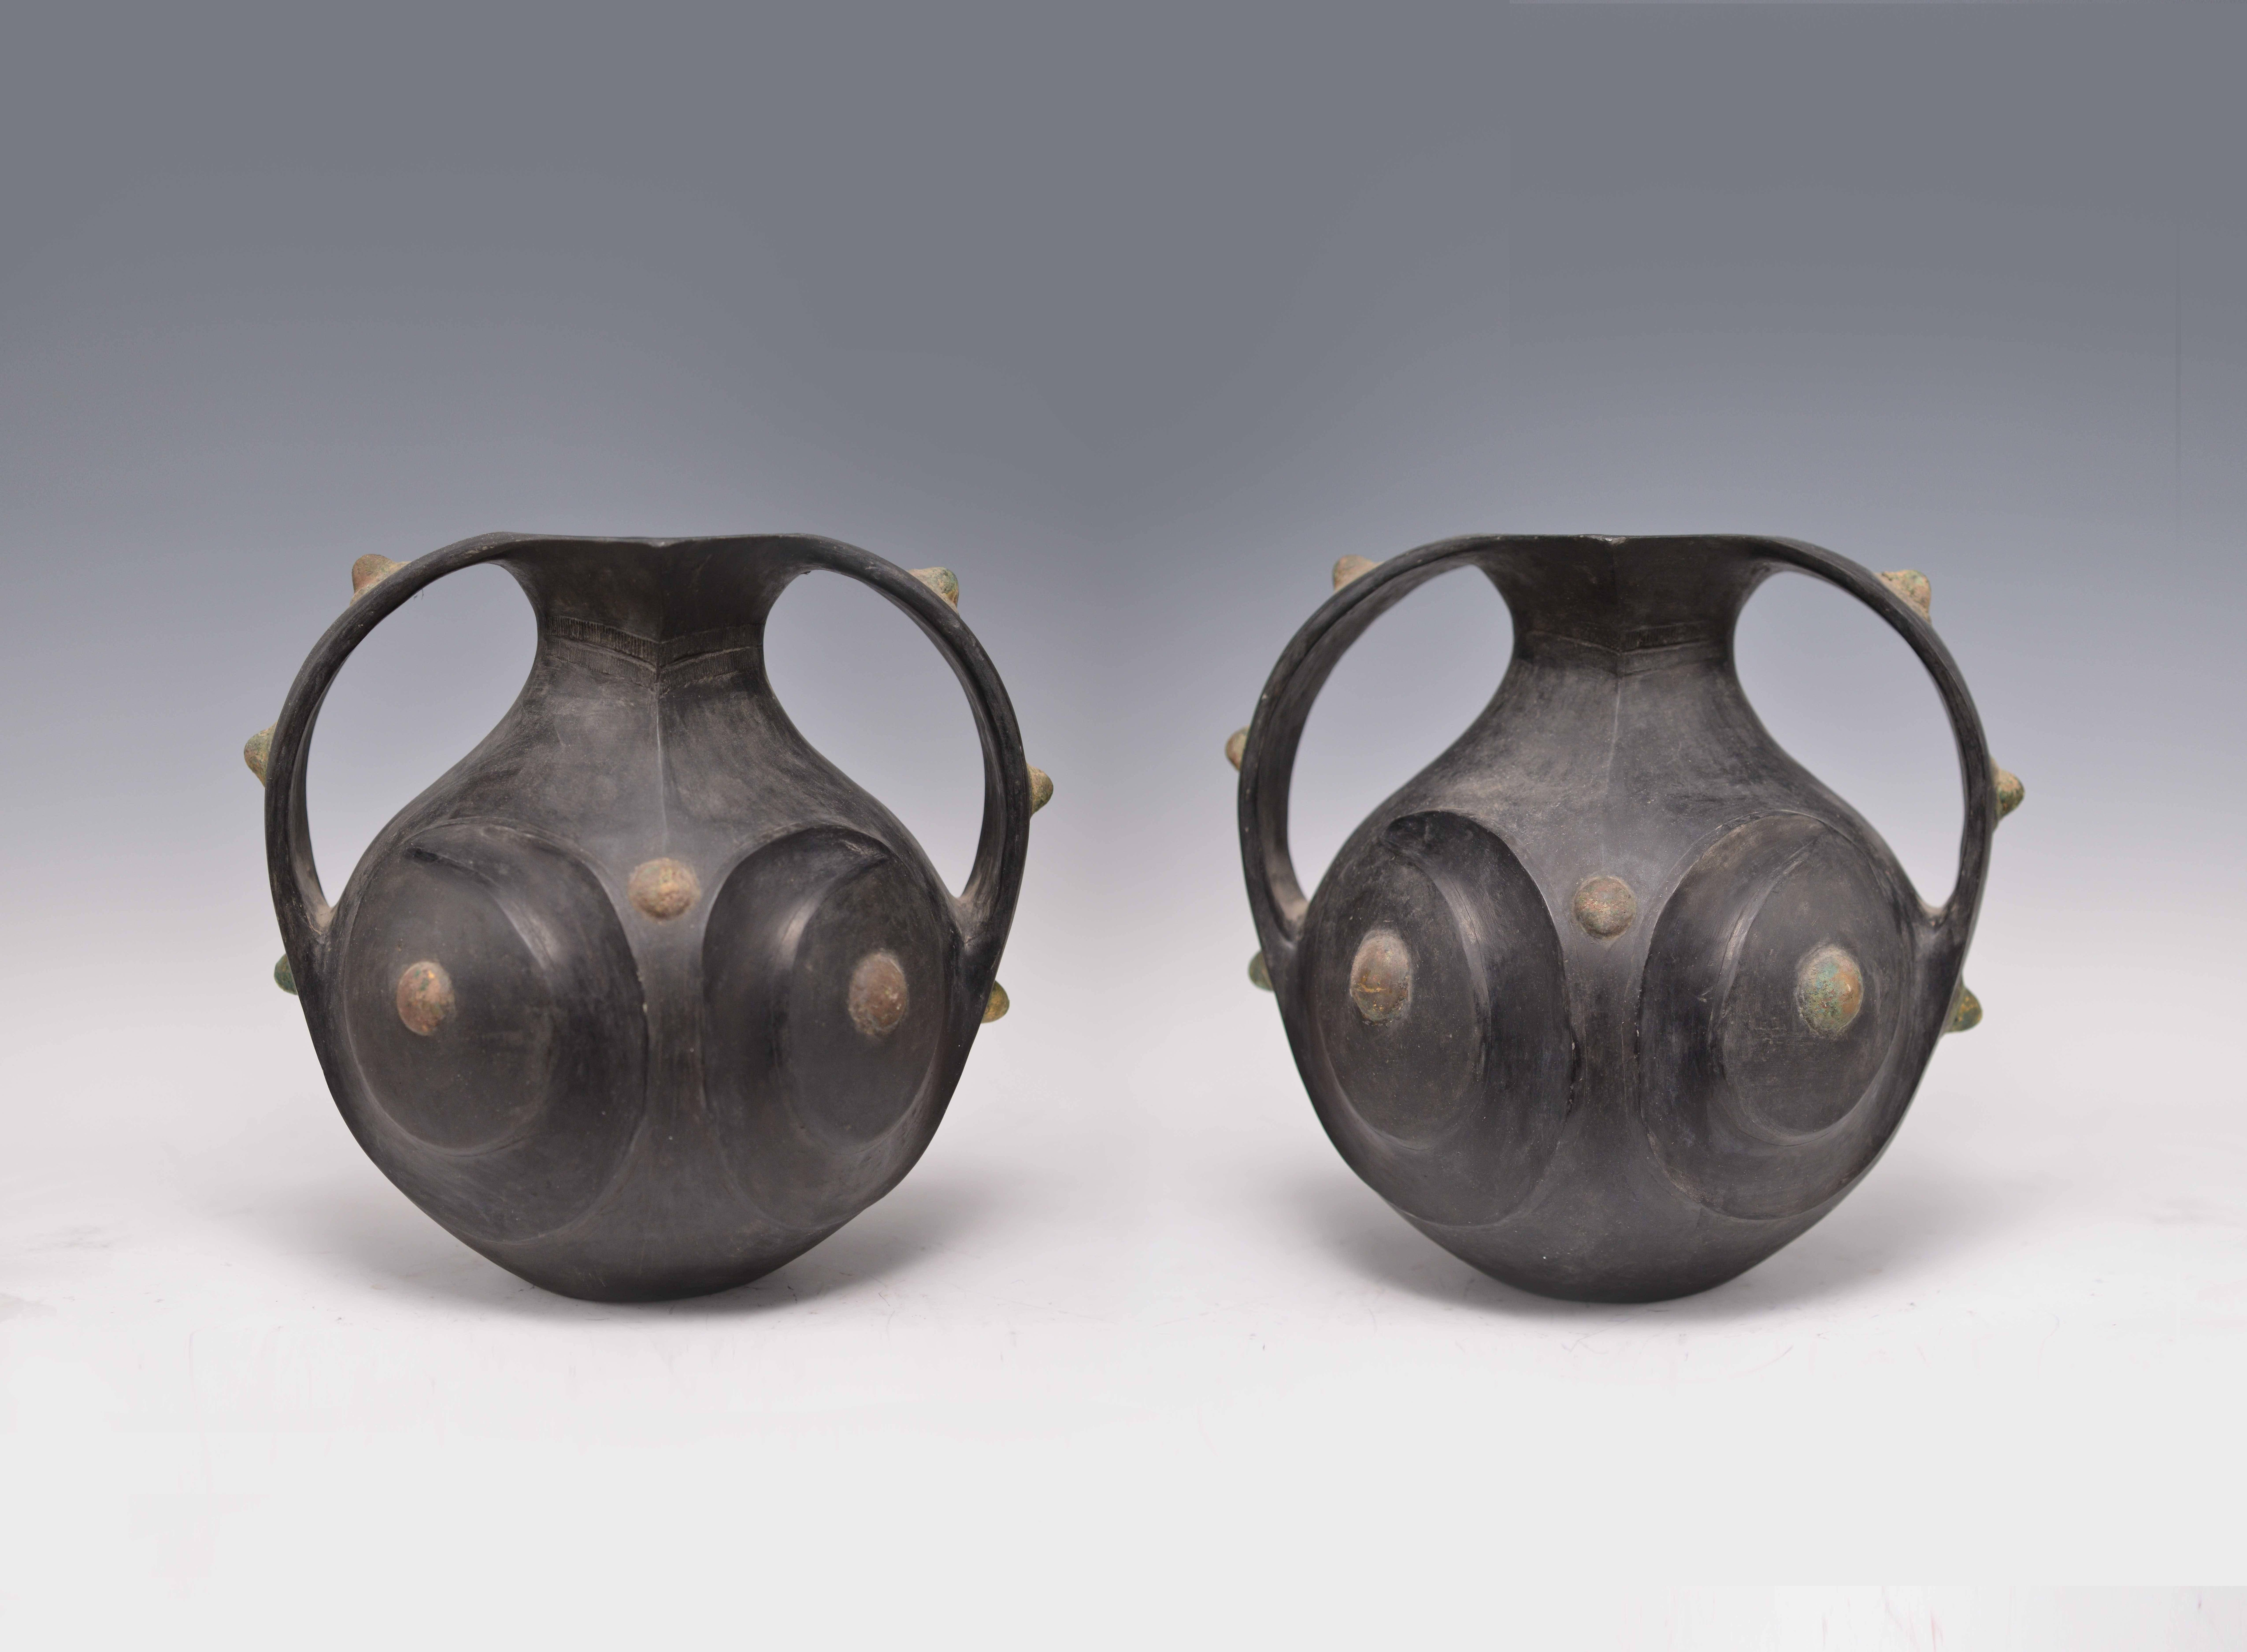 Frontal view of black pottery Amphora with two handles and mouth with two angular spouts. Round metal decoration applied around the body and handles. Original patina with natural mineral calcification. Han Dyansty 220BC.